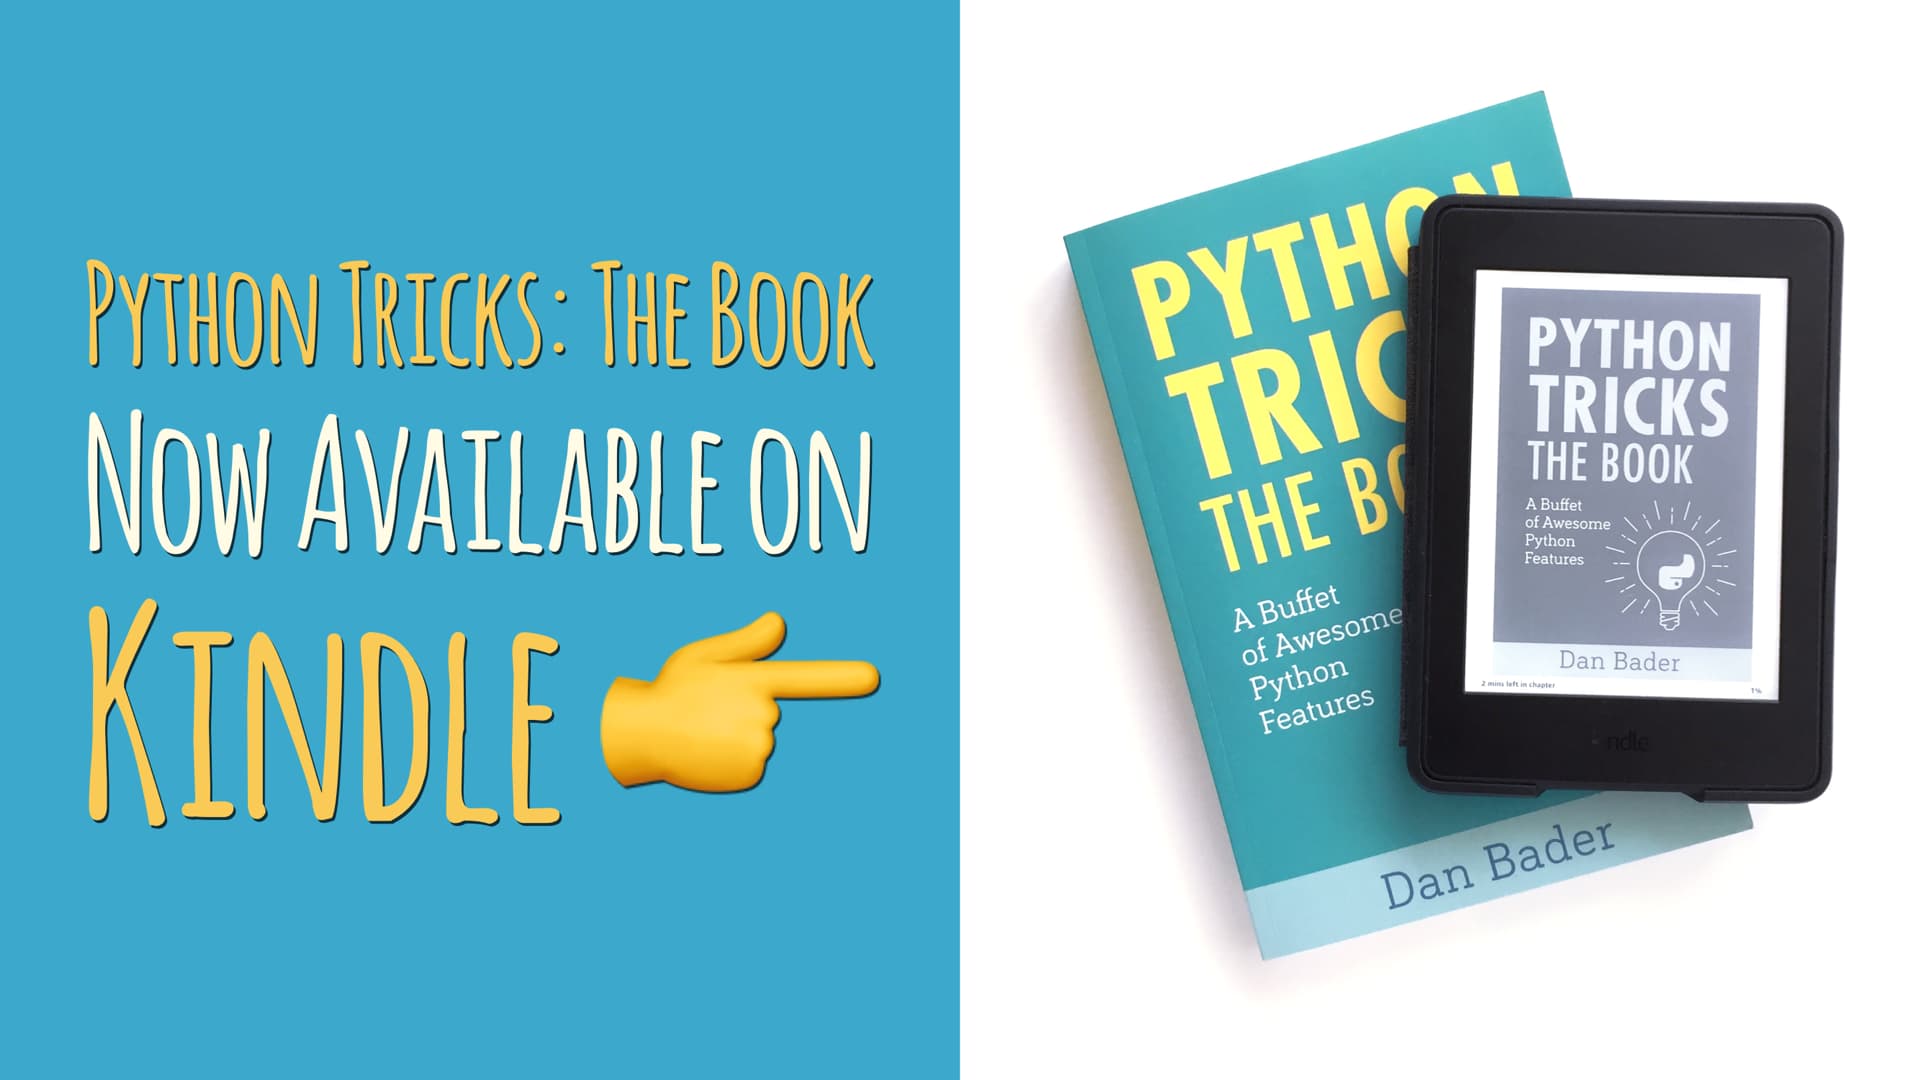 Python Tricks: The Book Is Now Available on Kindle